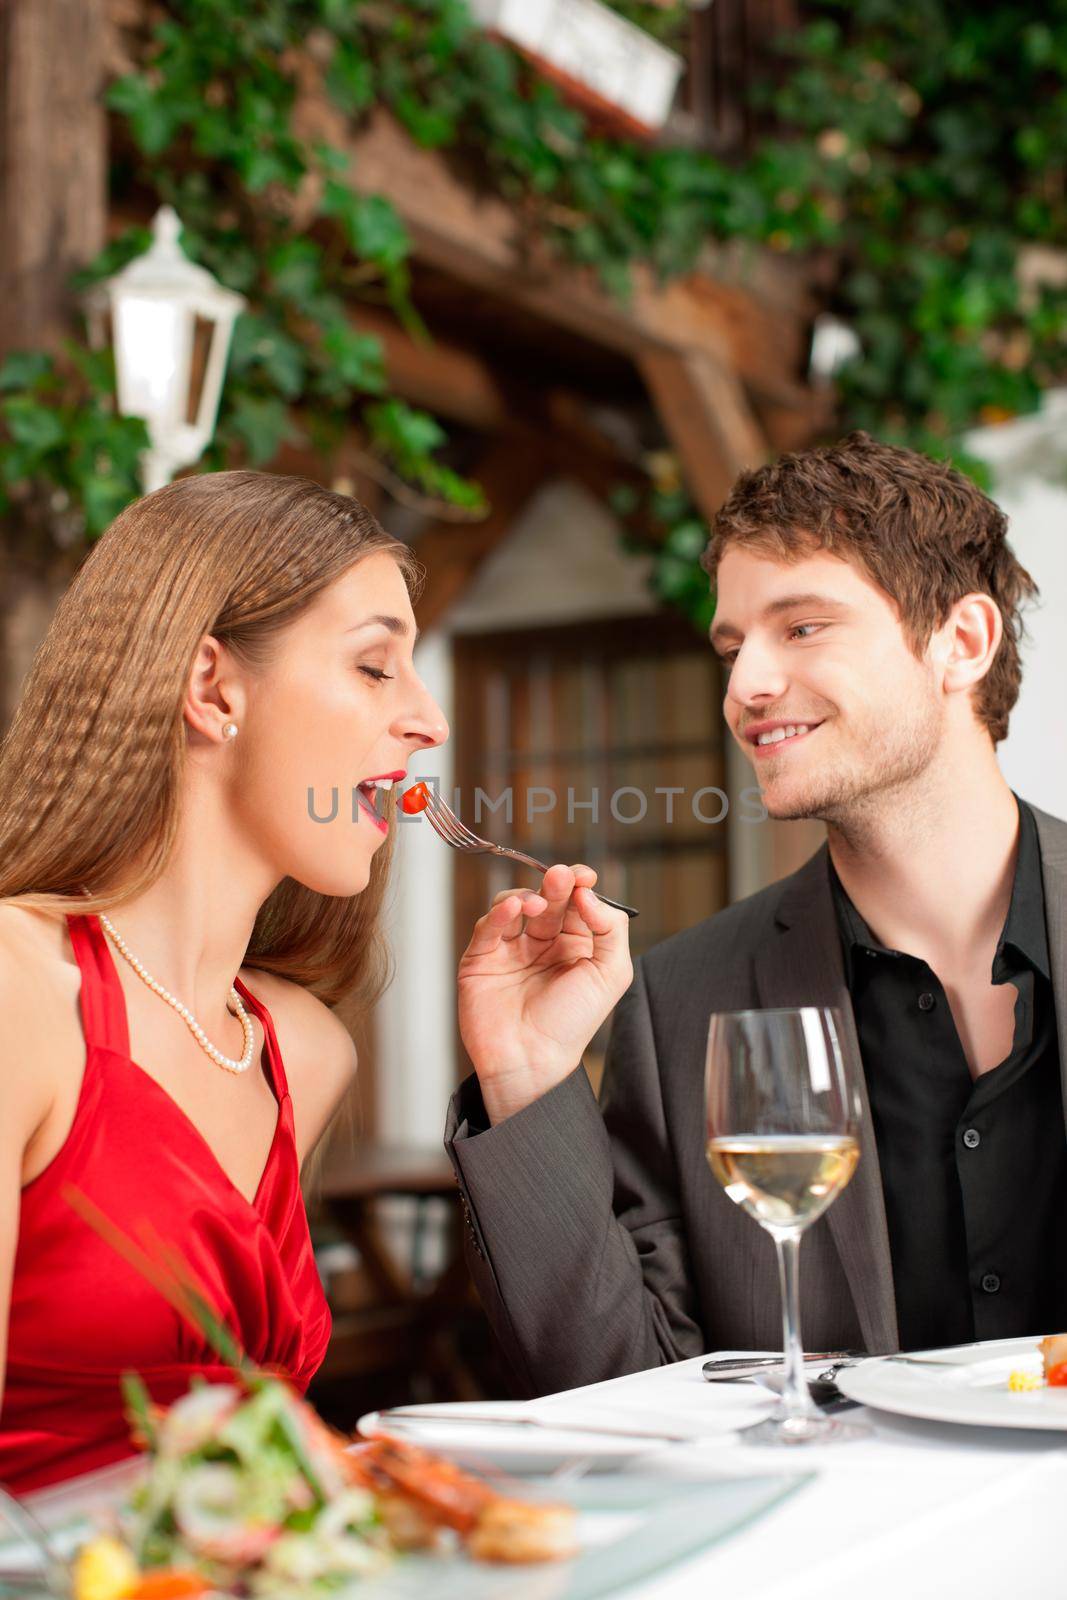 Couple on romantic date at a restaurant with food and wine